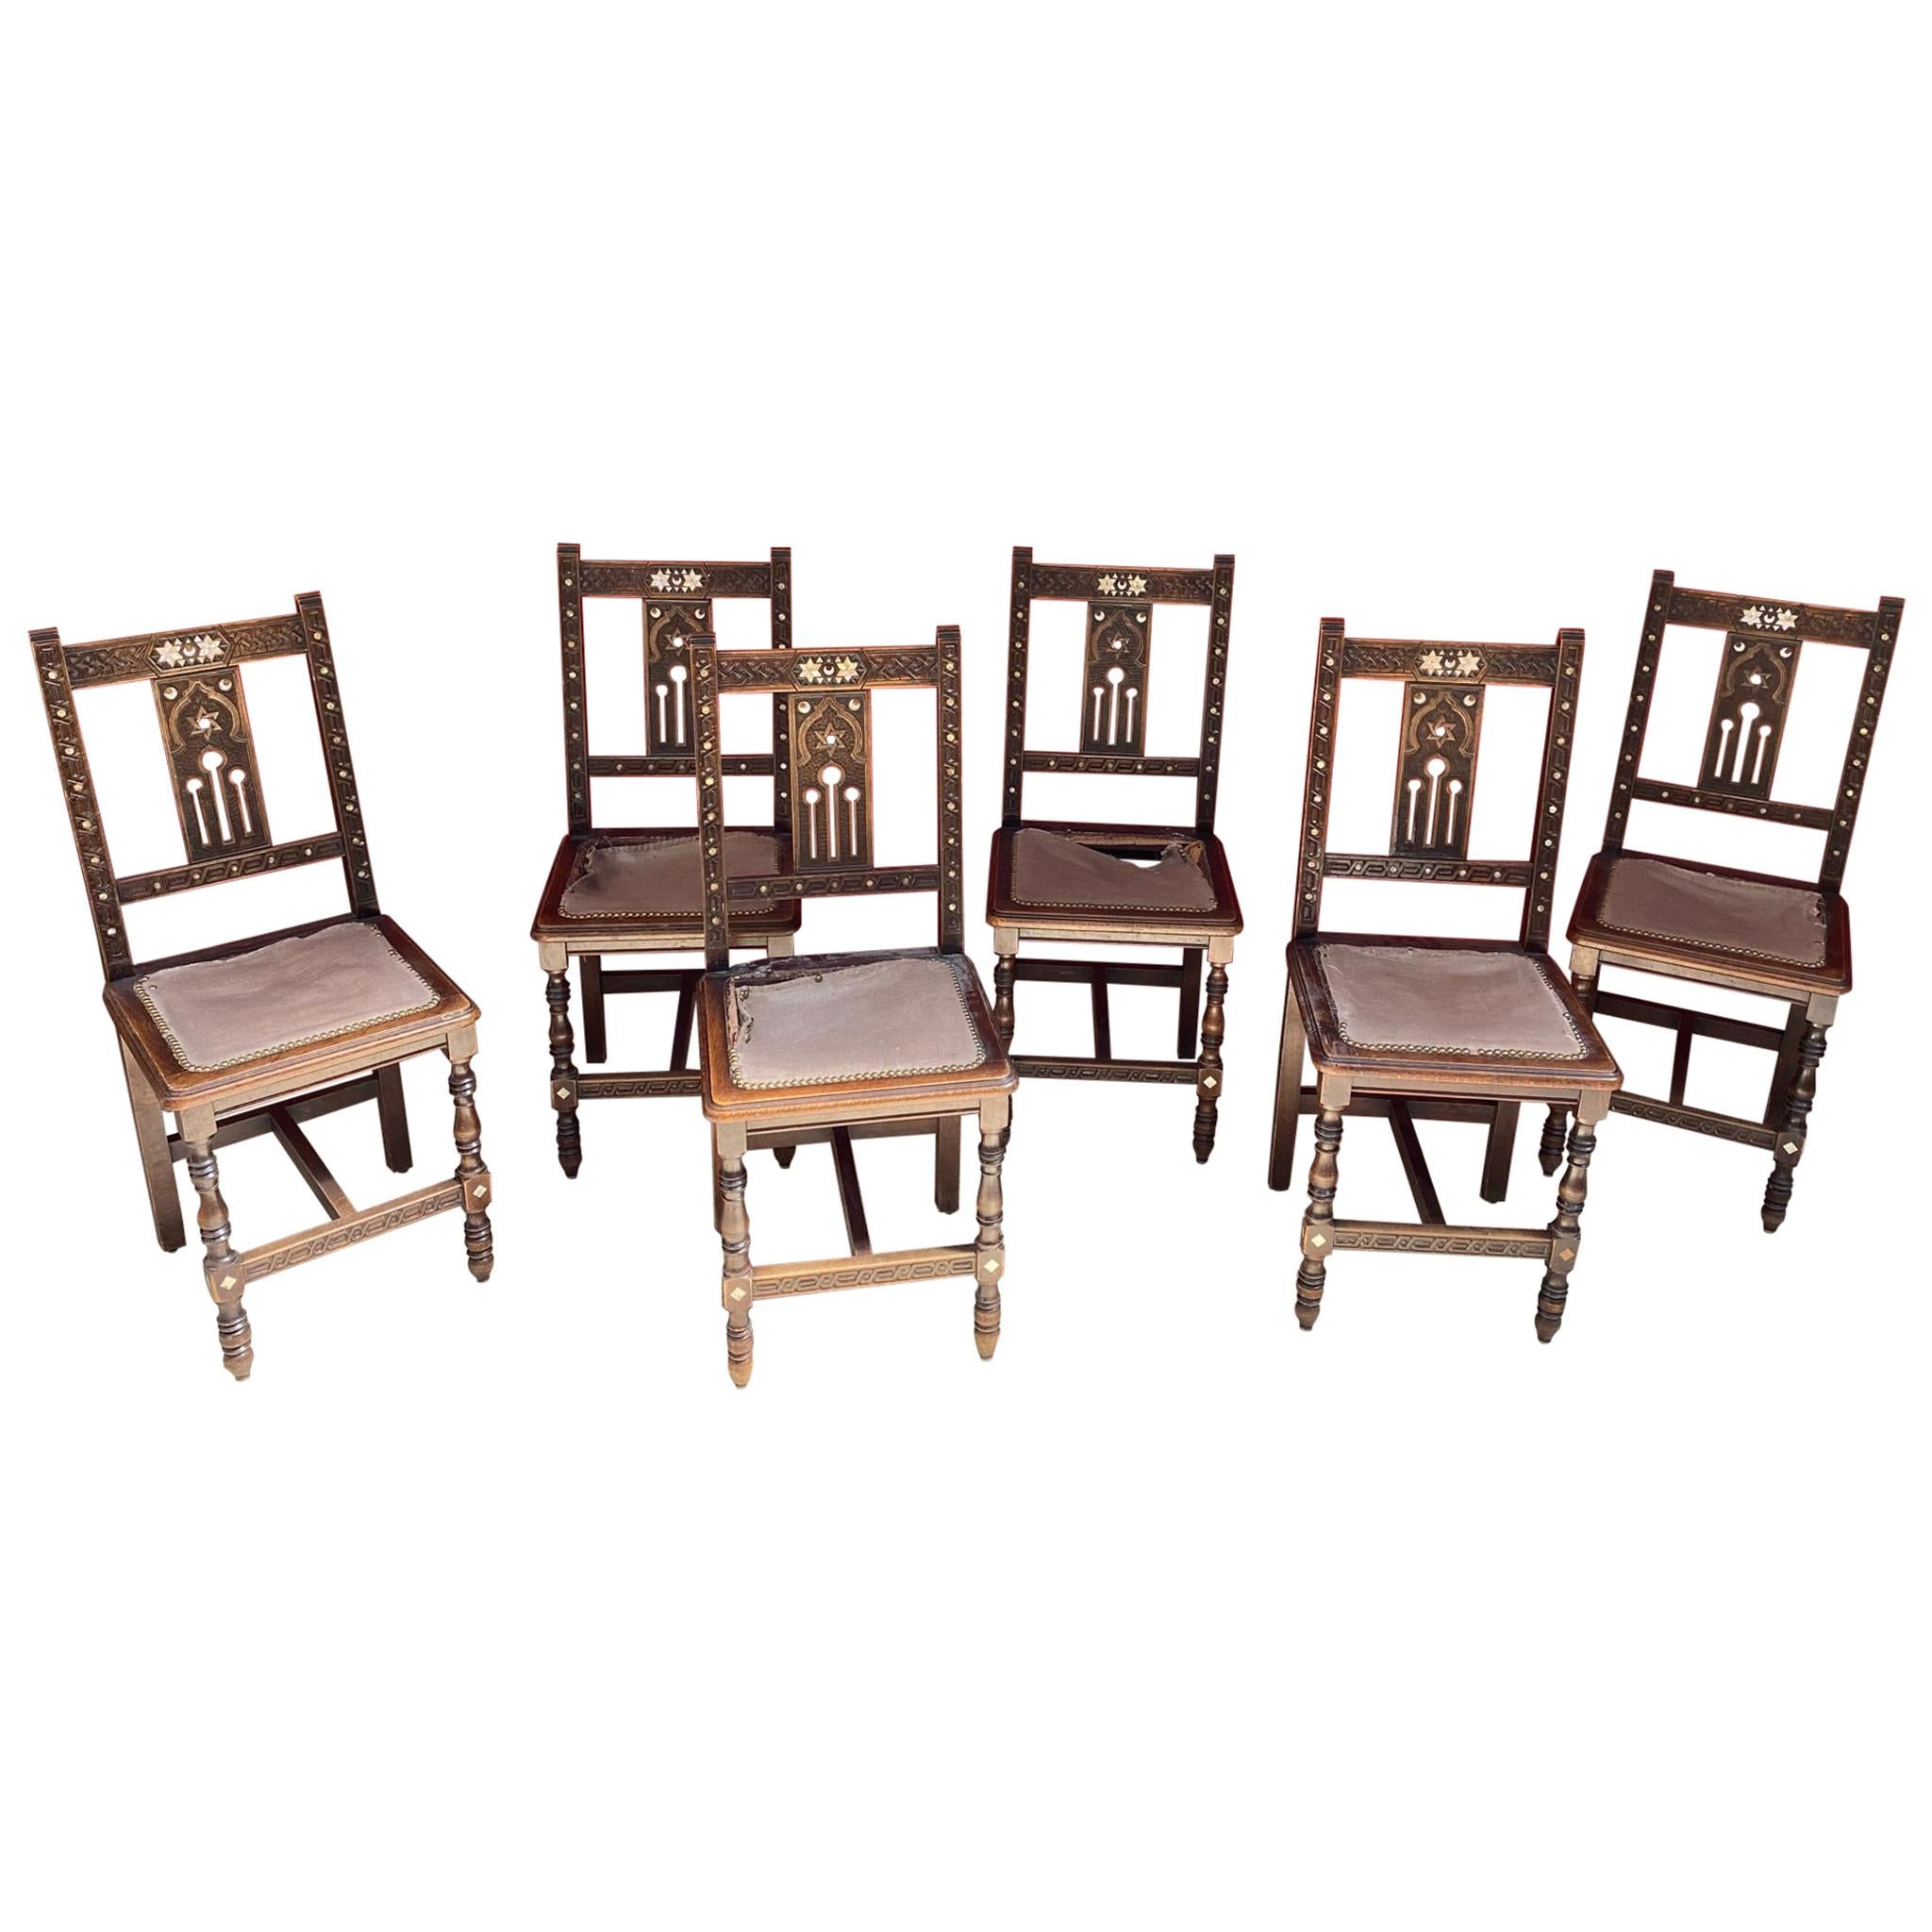 Set of 6 Oriental-Style Chairs in Carved Wood, with Mother-of-Pearl Inlay, 1880